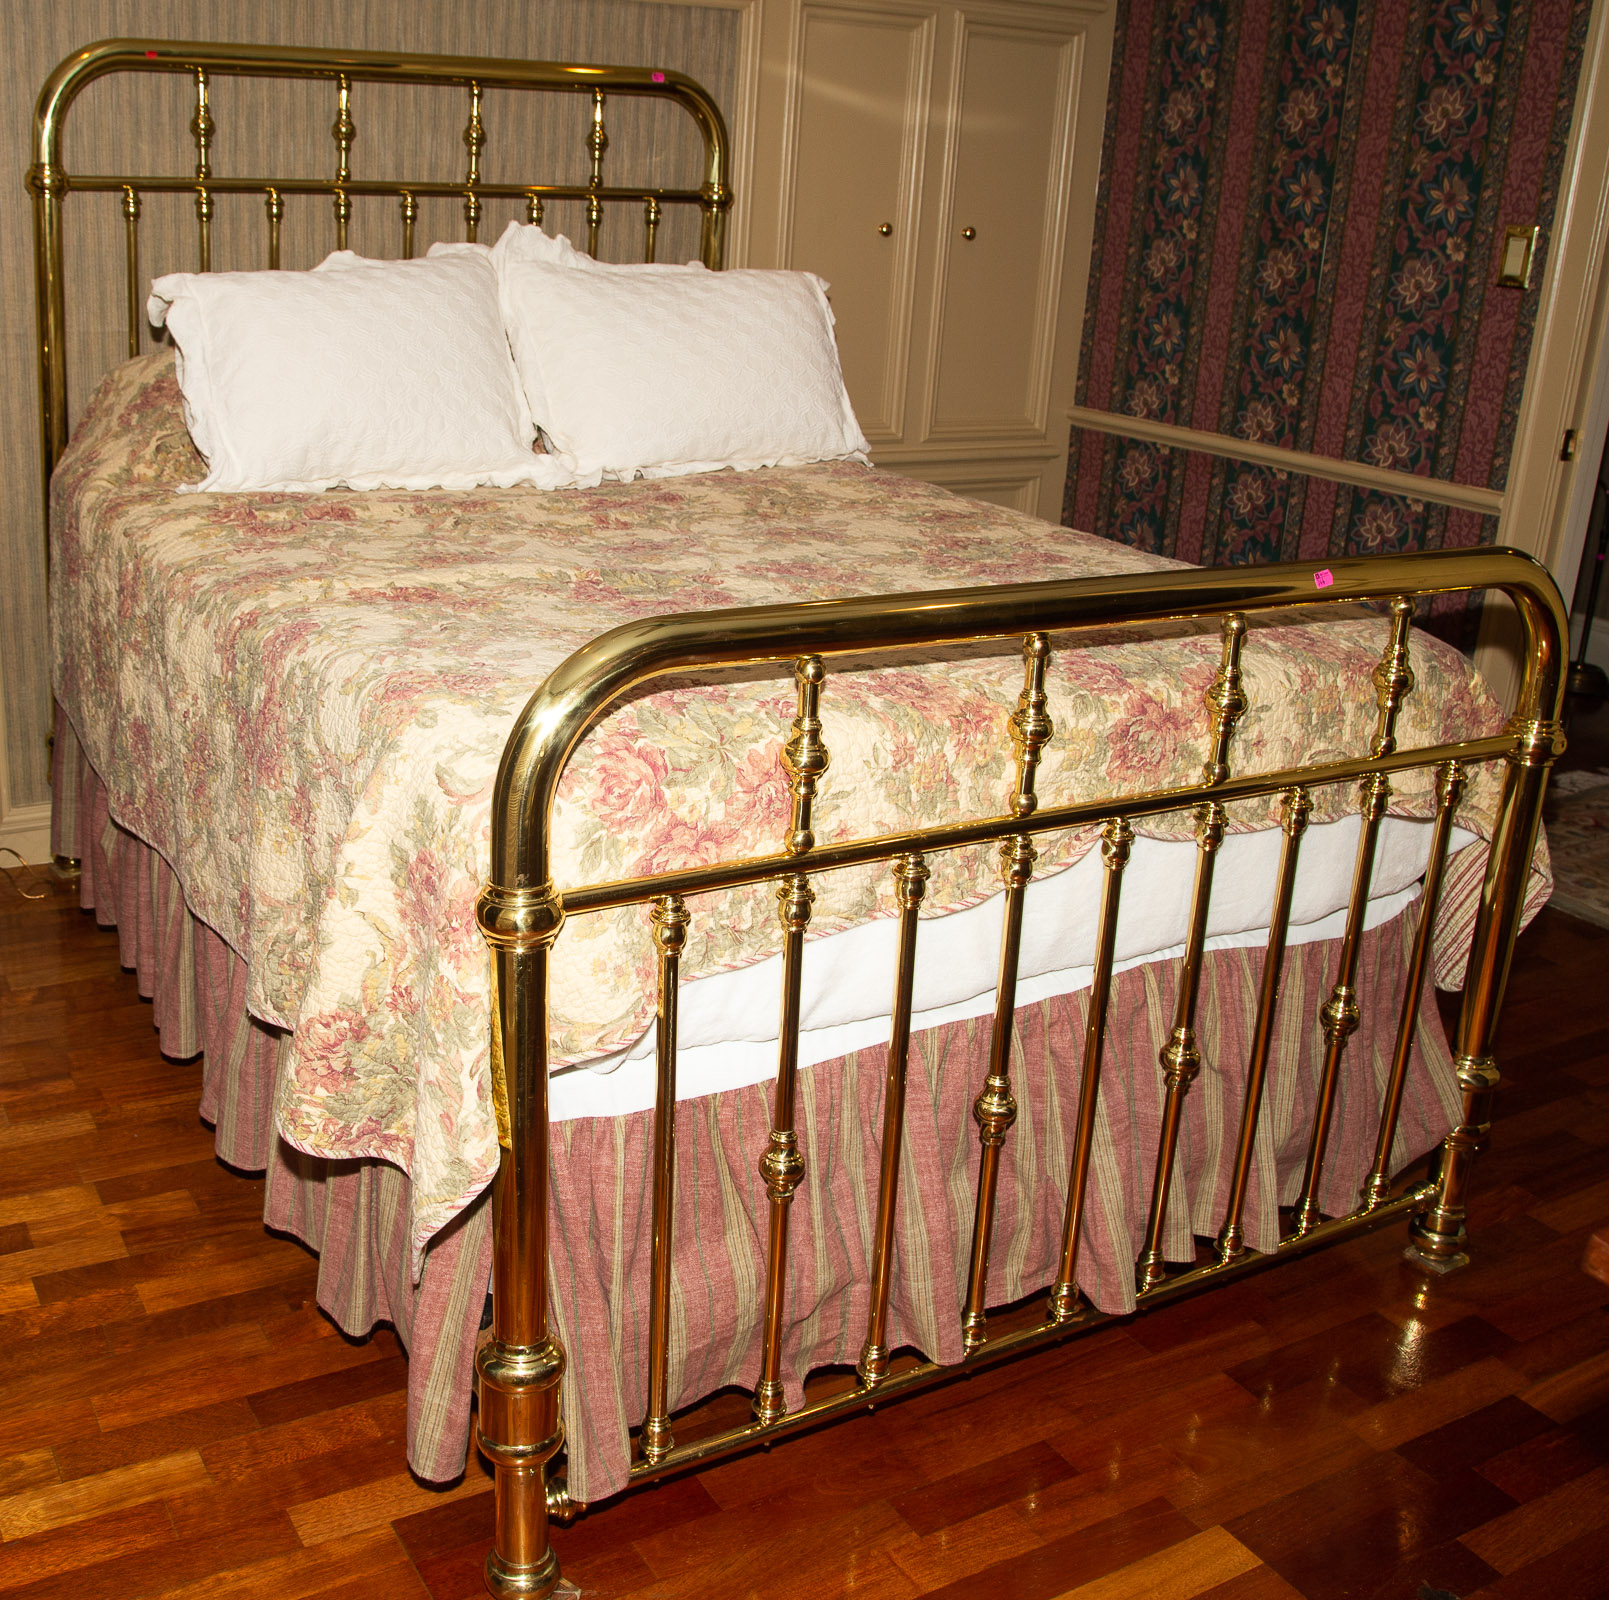 A BRASS BED & BUTLERS CHEST Full size